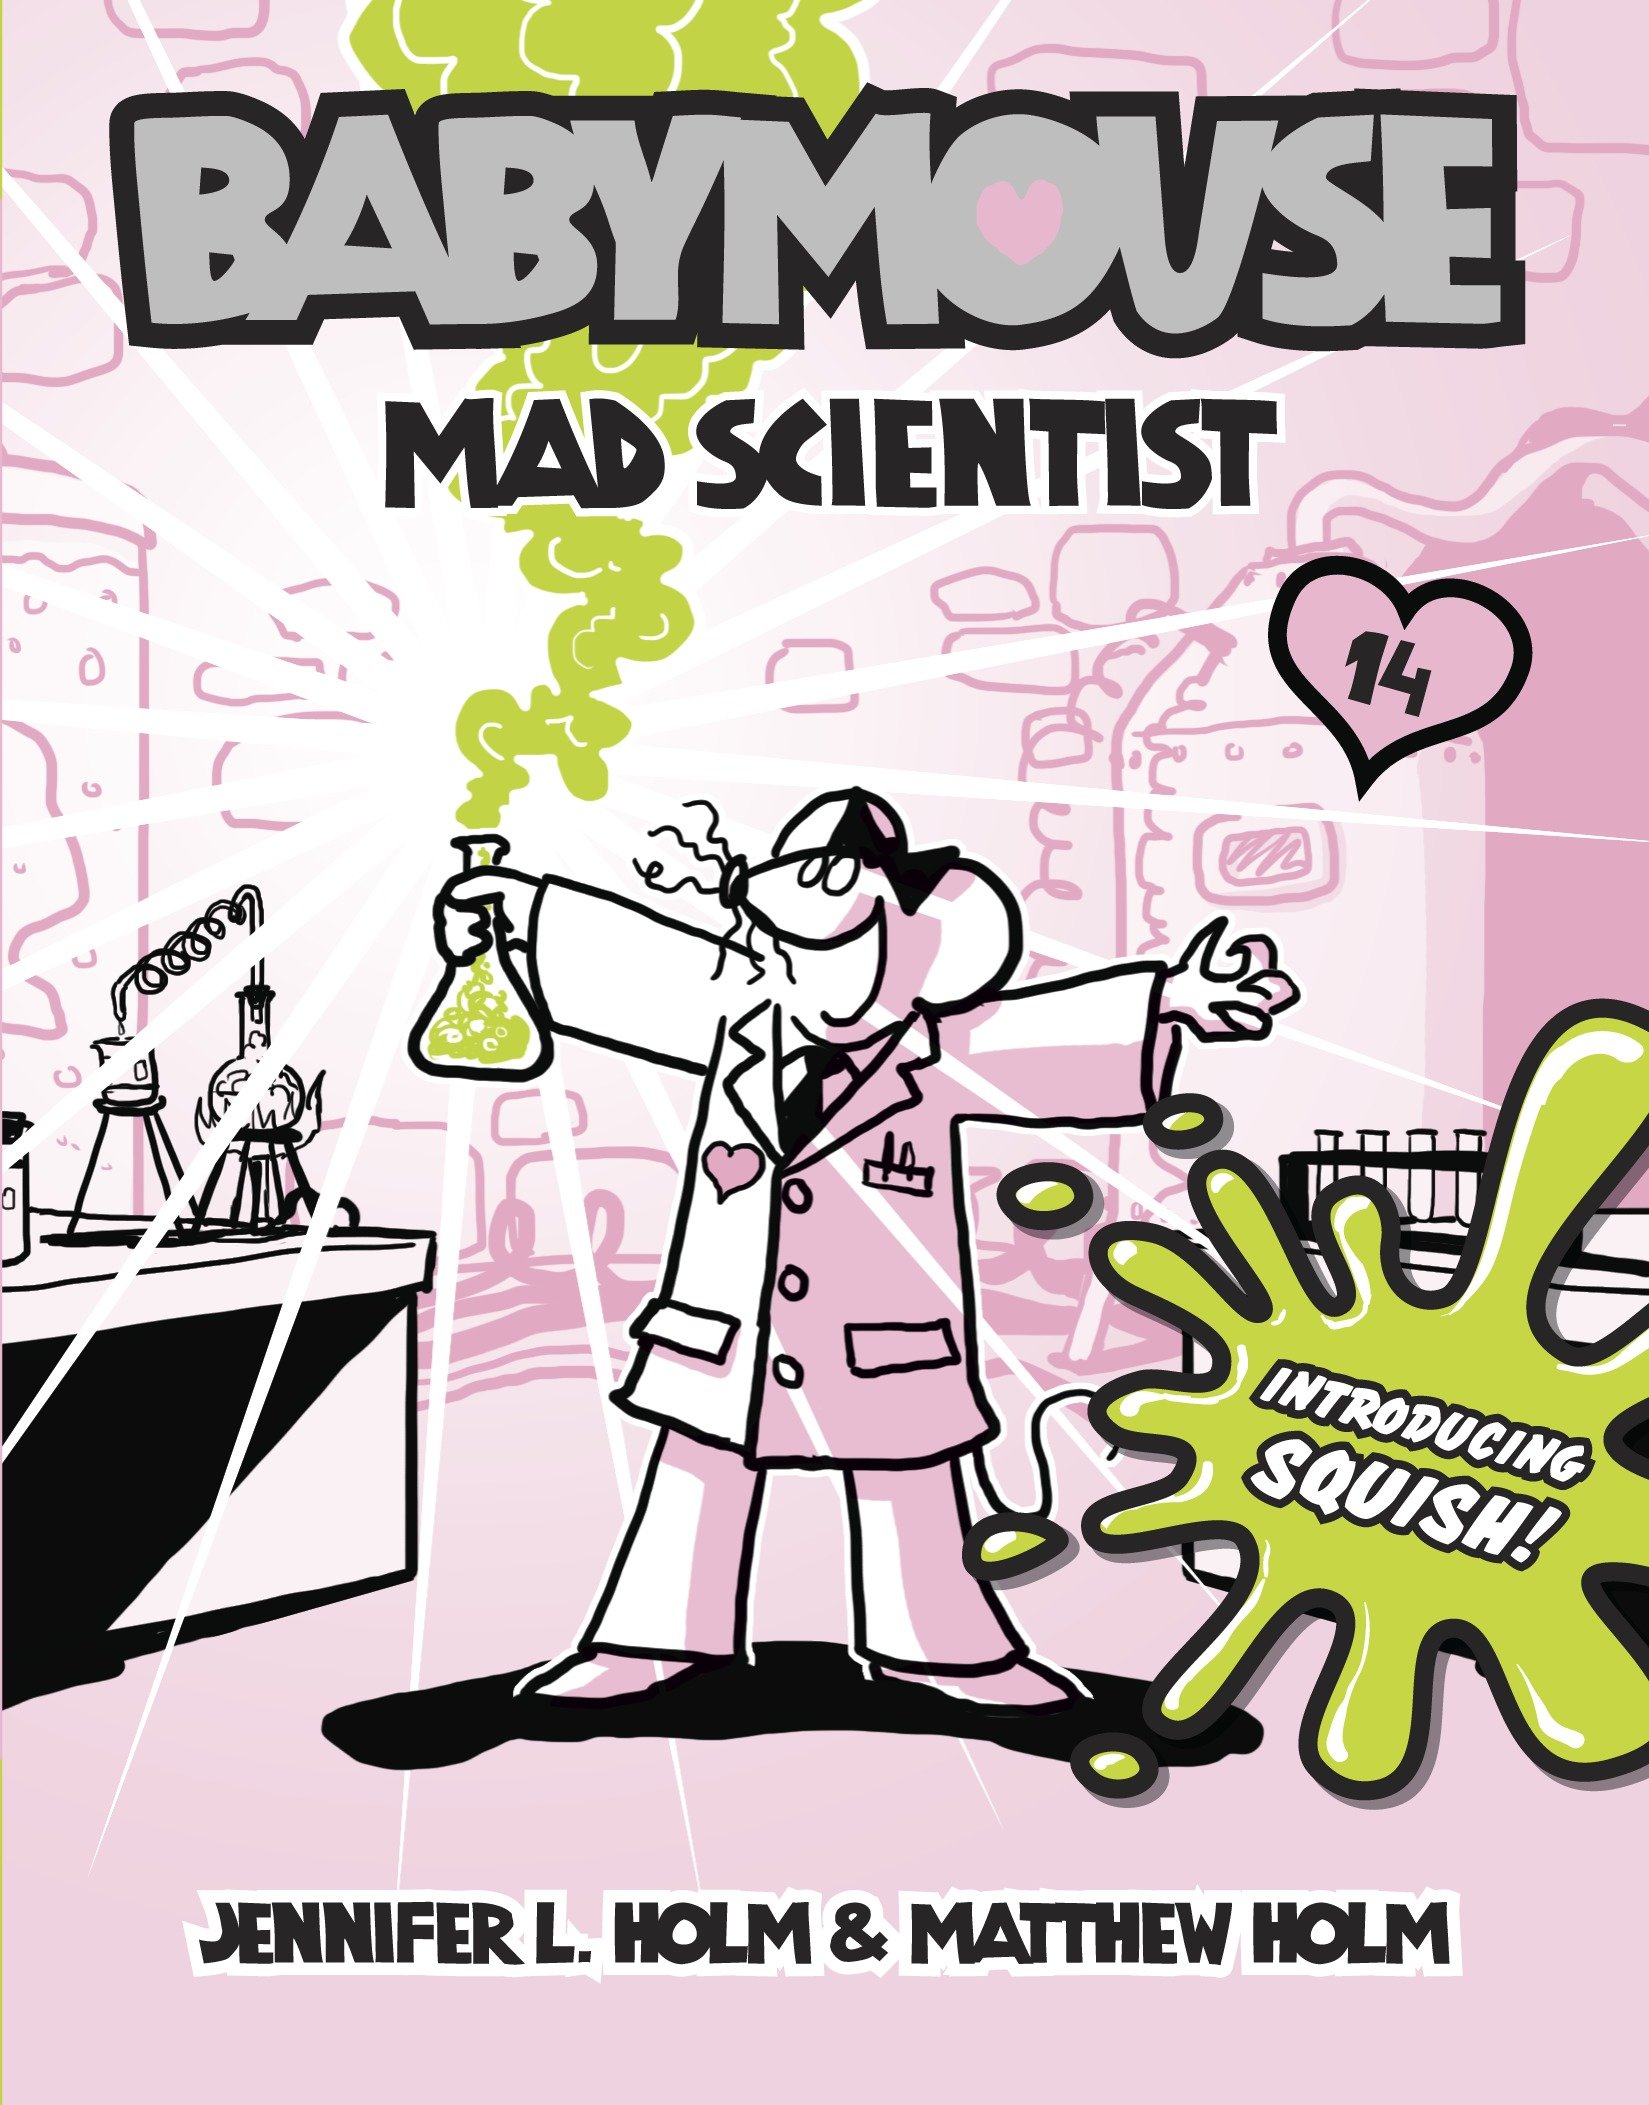 Babymouse Mad Scientist